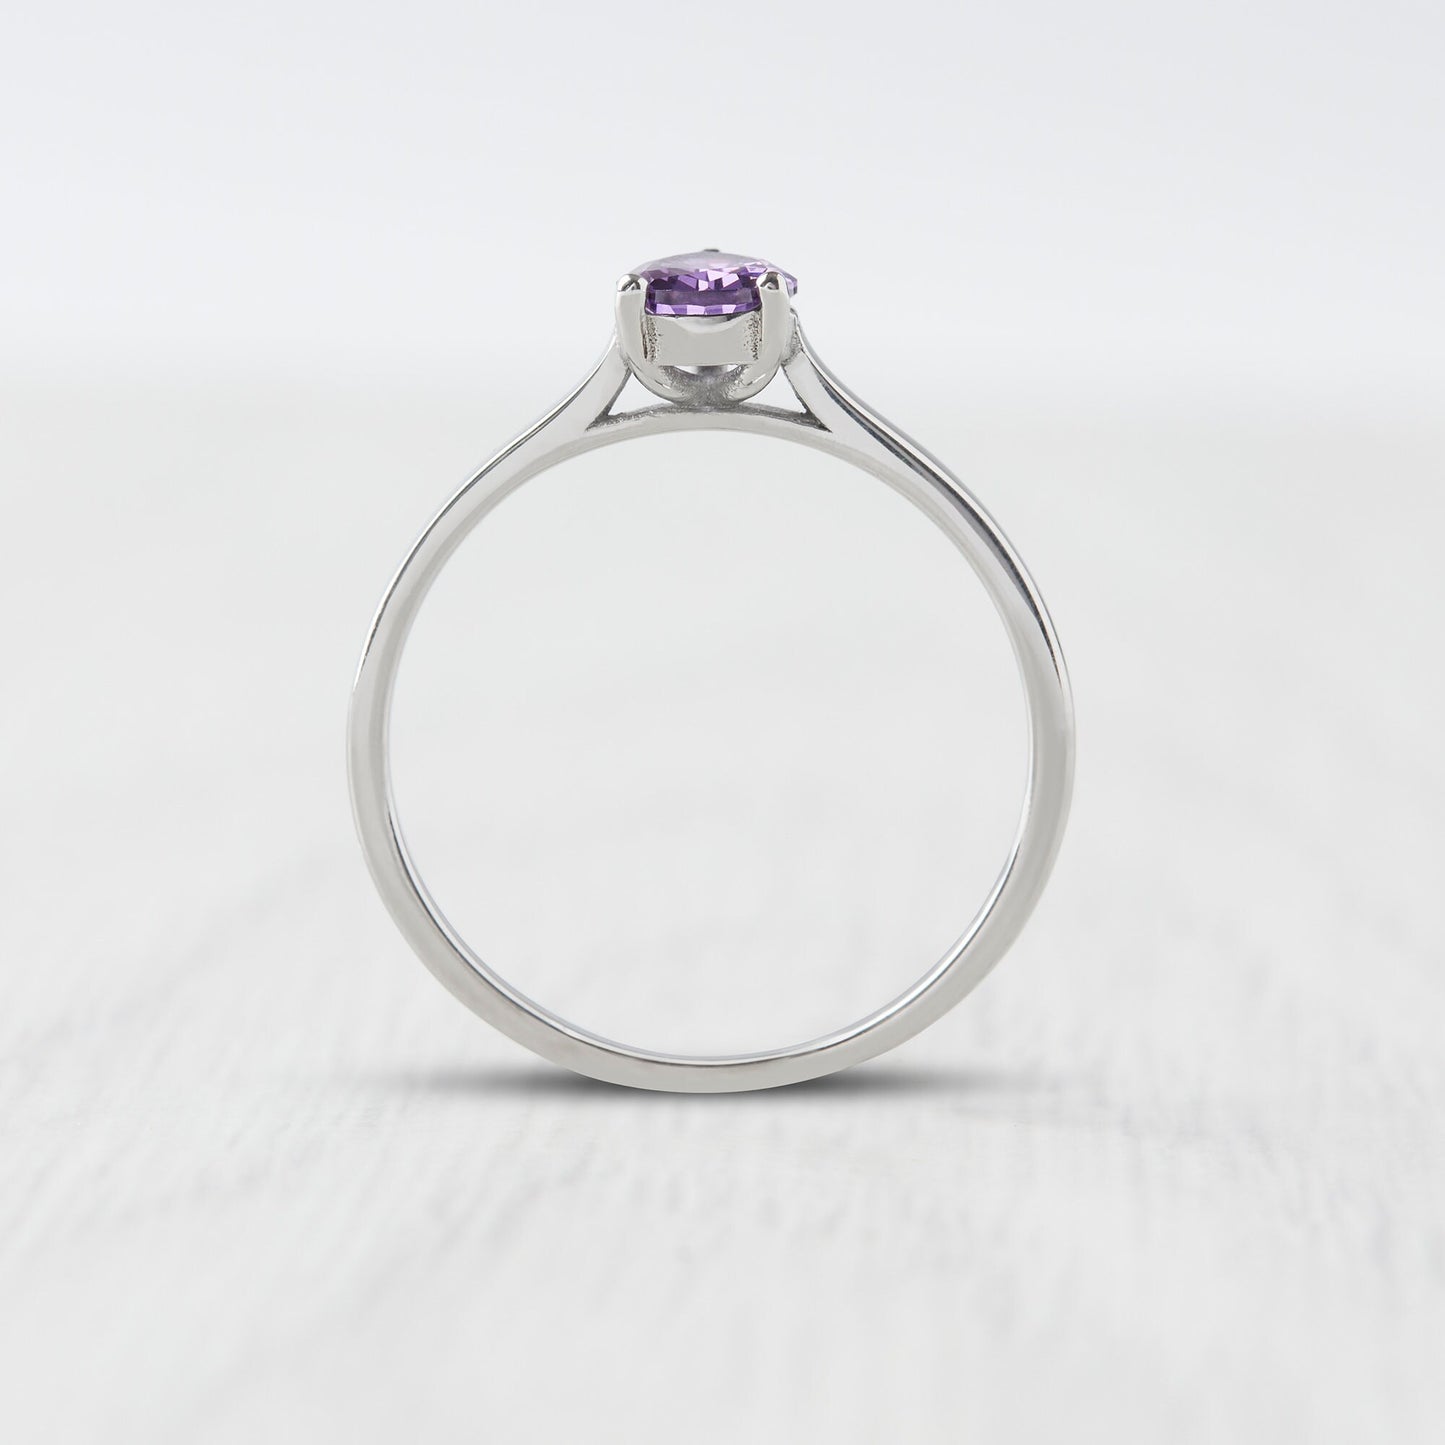 0.7ct Pear Cut Amethyst Solitaire cathedral ring in Titanium or White Gold